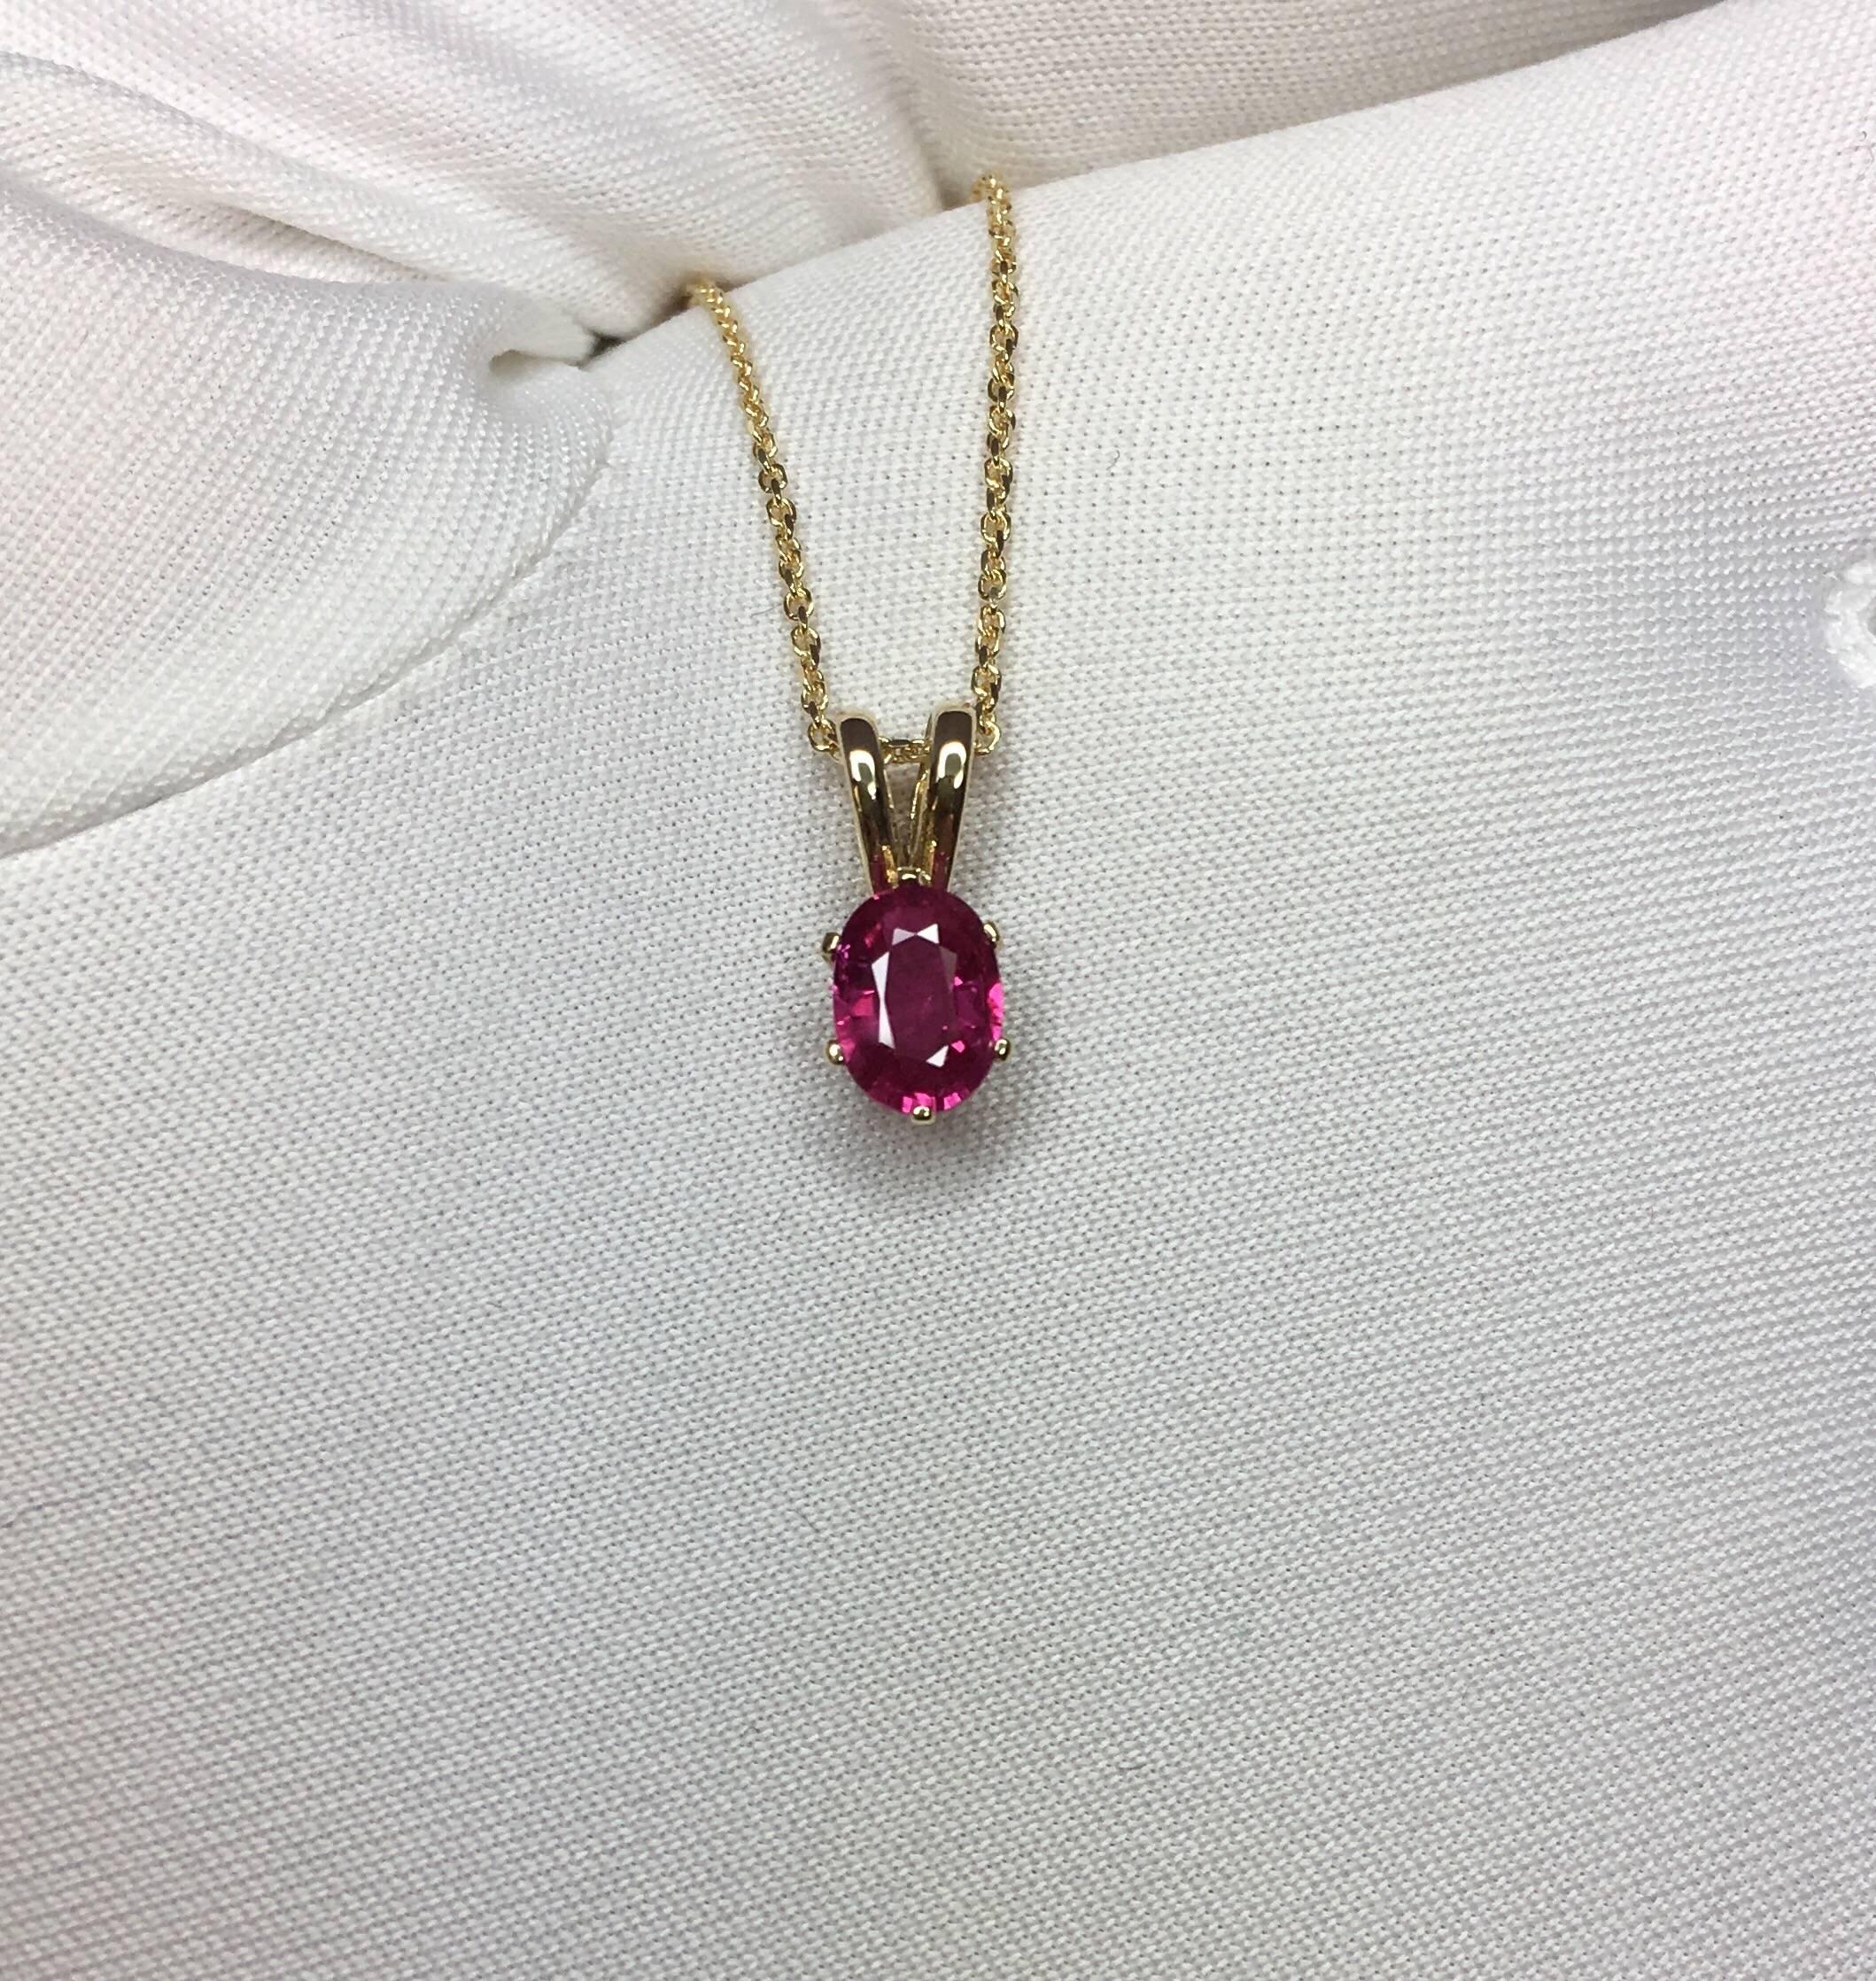 Beautiful natural 0.54ct vivid pinkish red ruby.
Set in a fine 14k yellow gold 6 prong solitaire pendant.

Stunning ruby with a vivid pinkish red colour and excellent clarity, very clean.

It also has an excellent oval cut which shows lots of